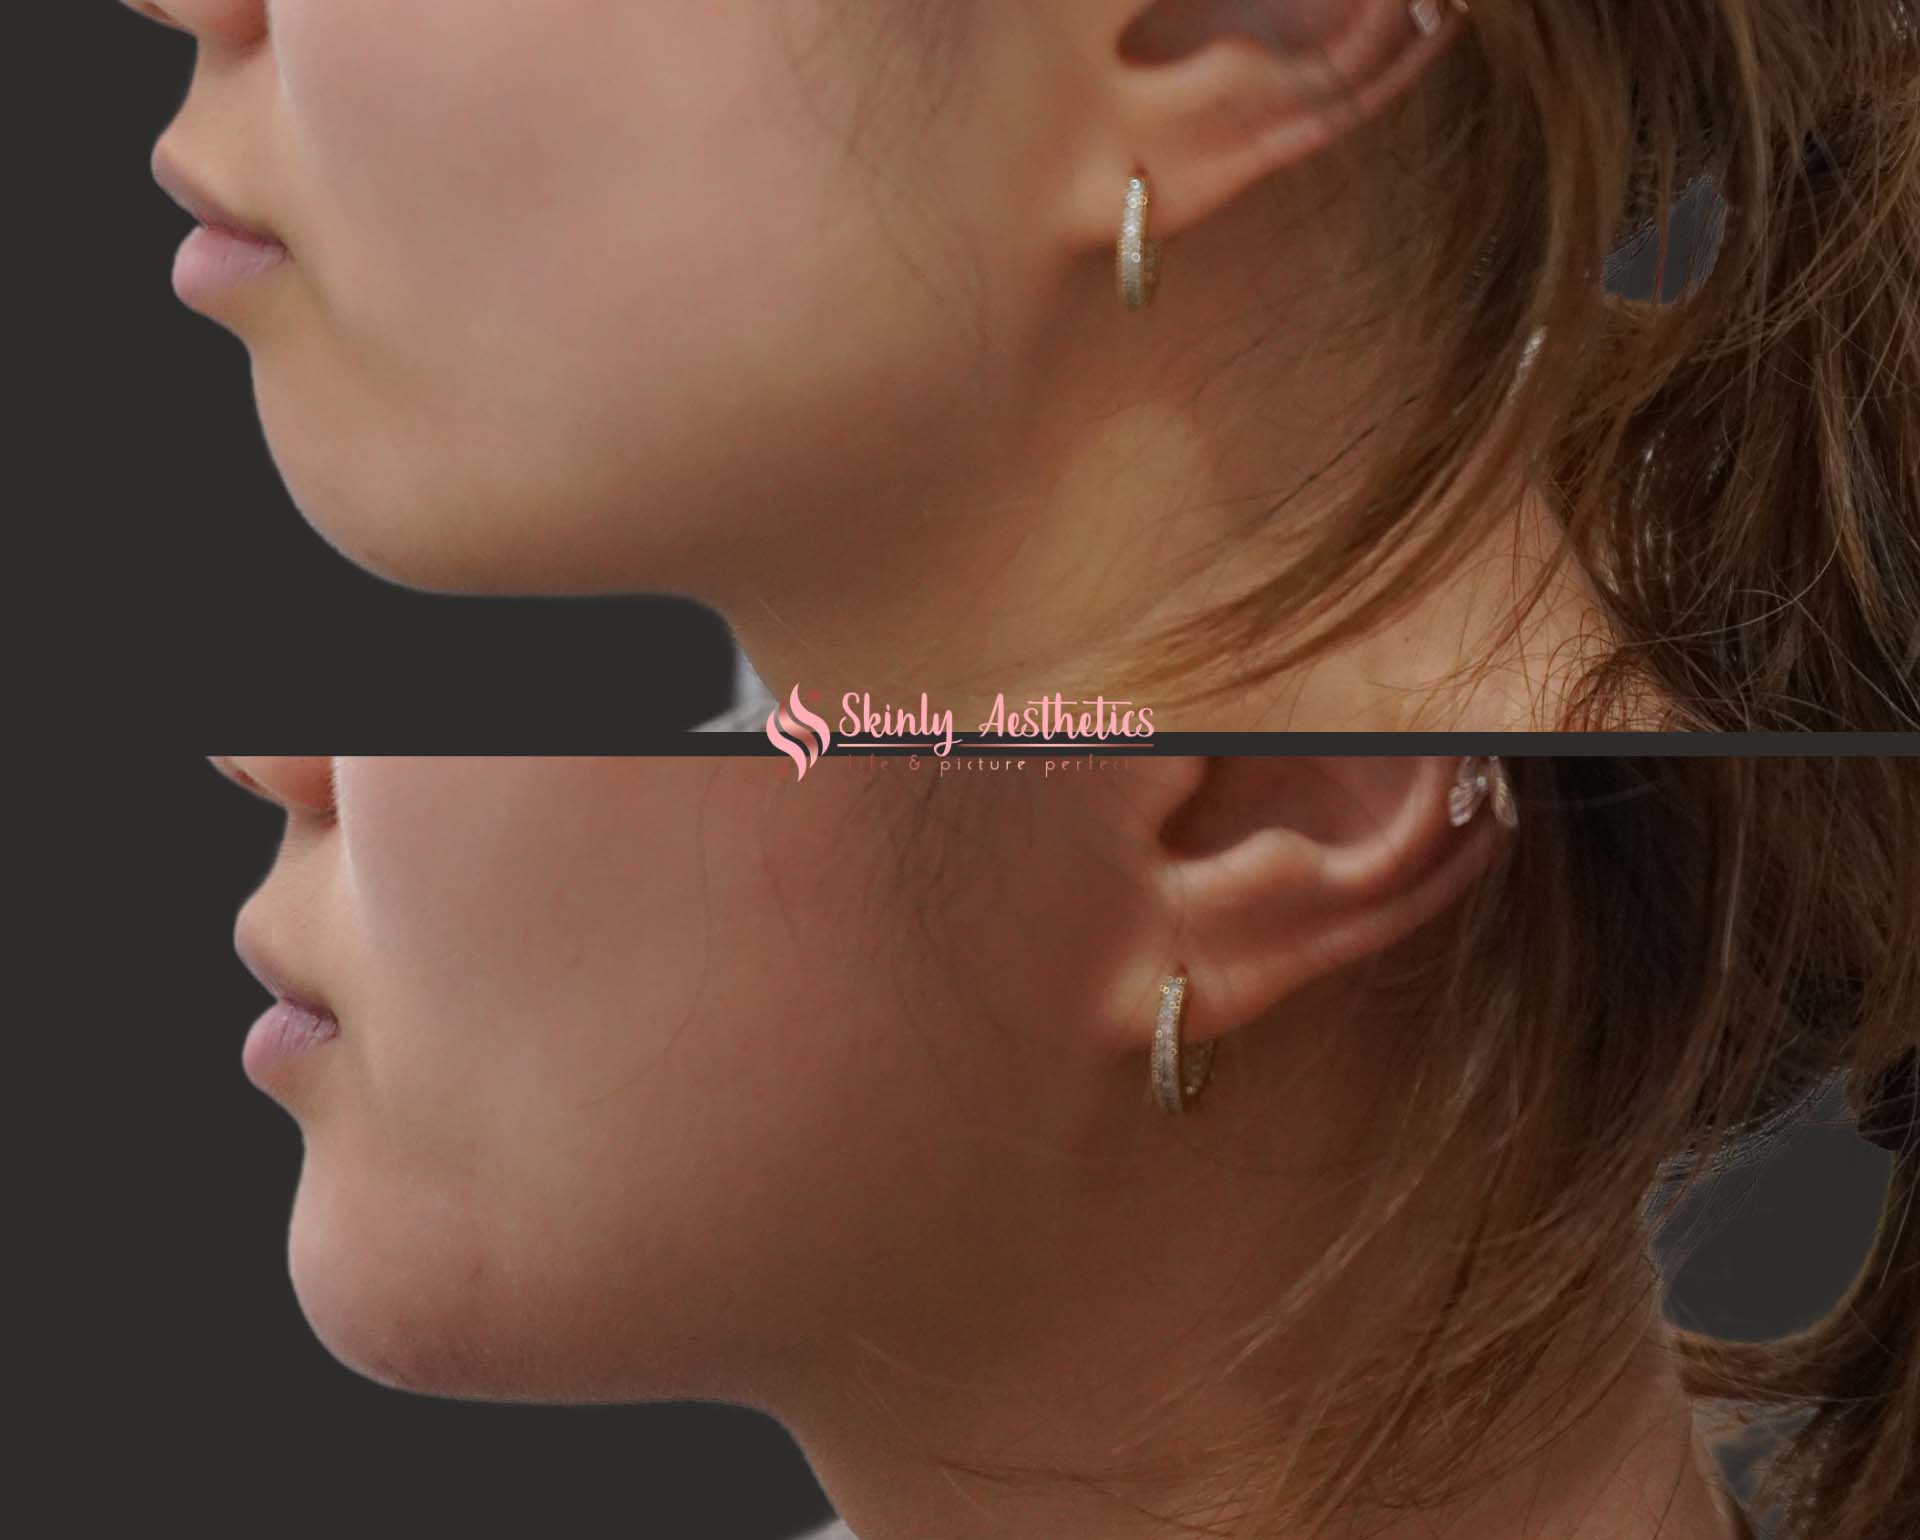 before and after results showing chin extension, elongation and augmentation with Juvederm Voluma hyaluronic acid filler